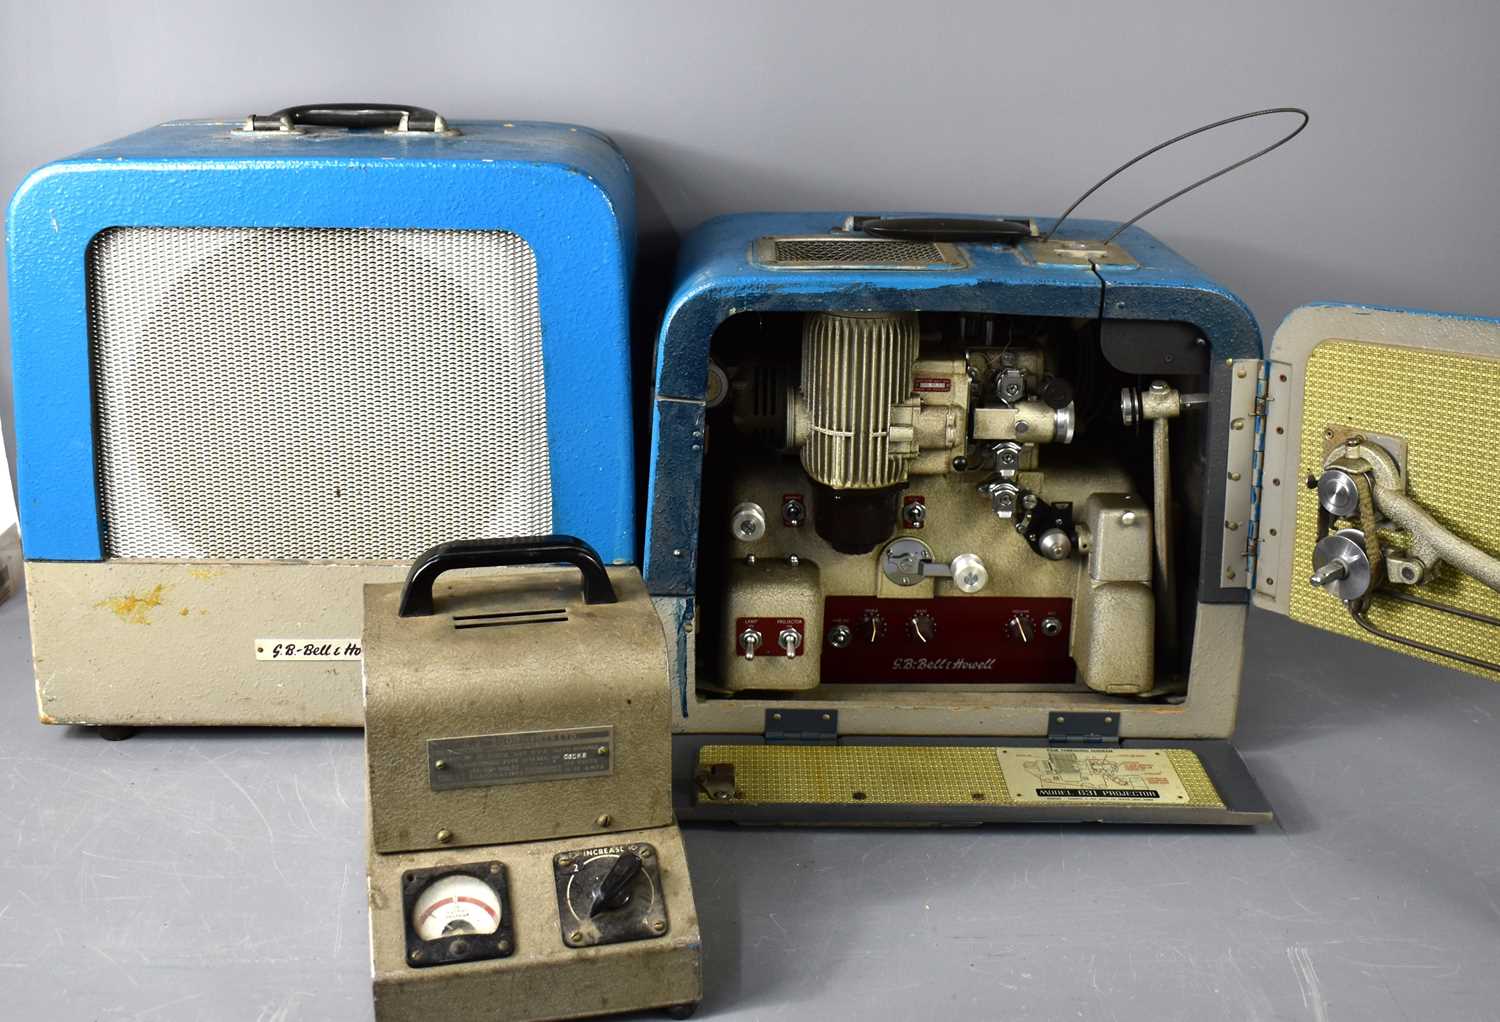 A Bell & Howell 16mm film projector, model 631 together with a Bell & Howell speaker box and